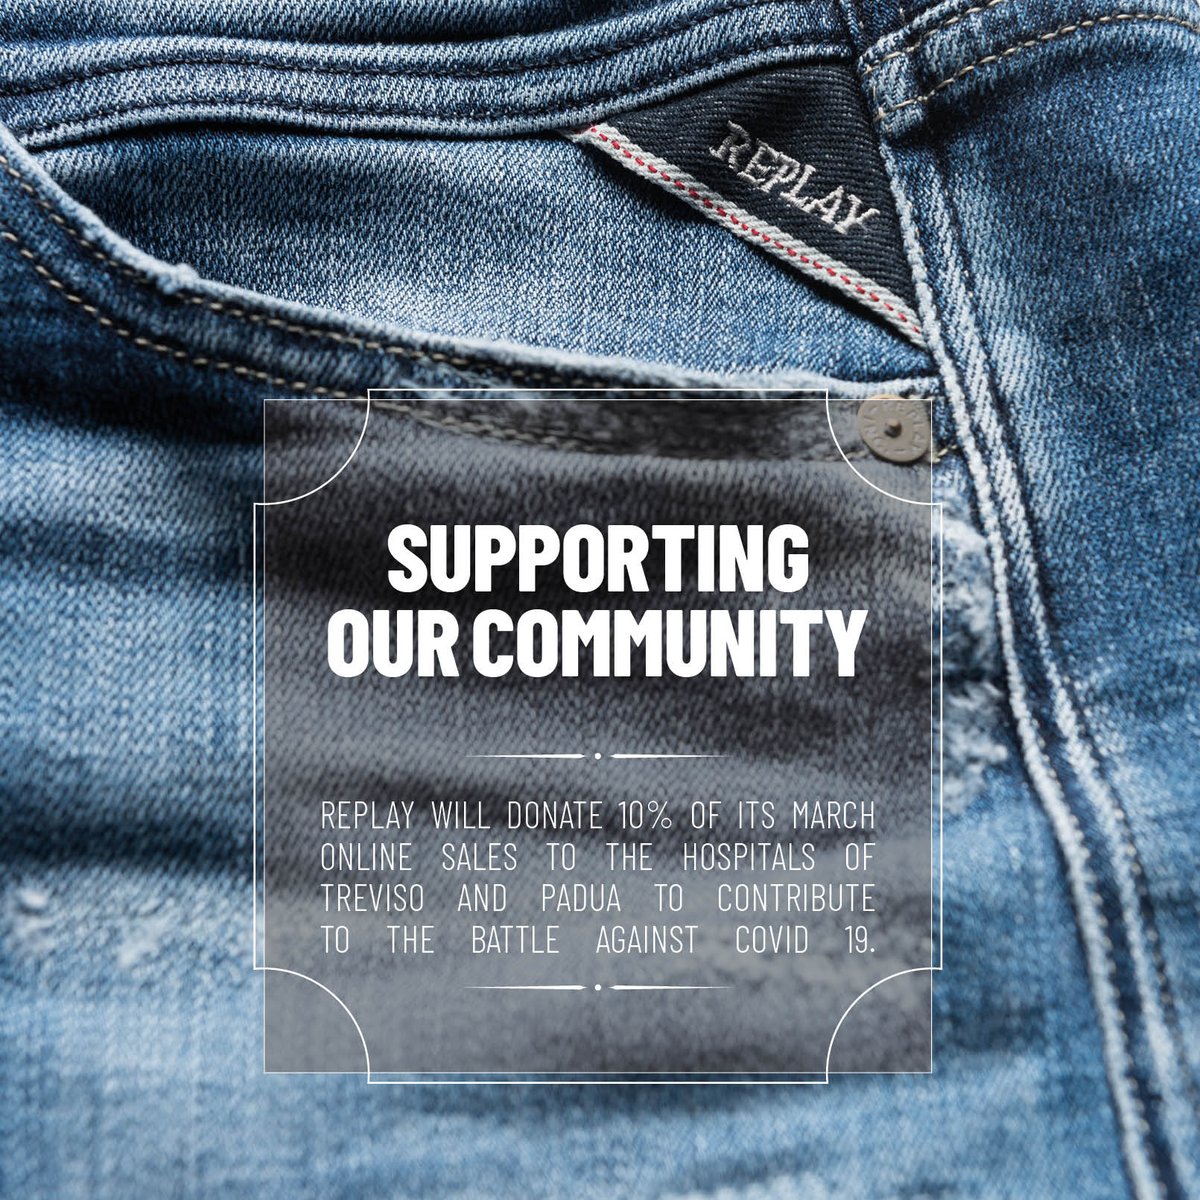 Together we are supporting our community. Thanks to your purchases, we'll be donating 10% of our March online sales to the hospitals of Treviso and Padua. Together we are stronger. replayjeans.com #ReplayJeans #COVID19 #StaySafe #StayHome